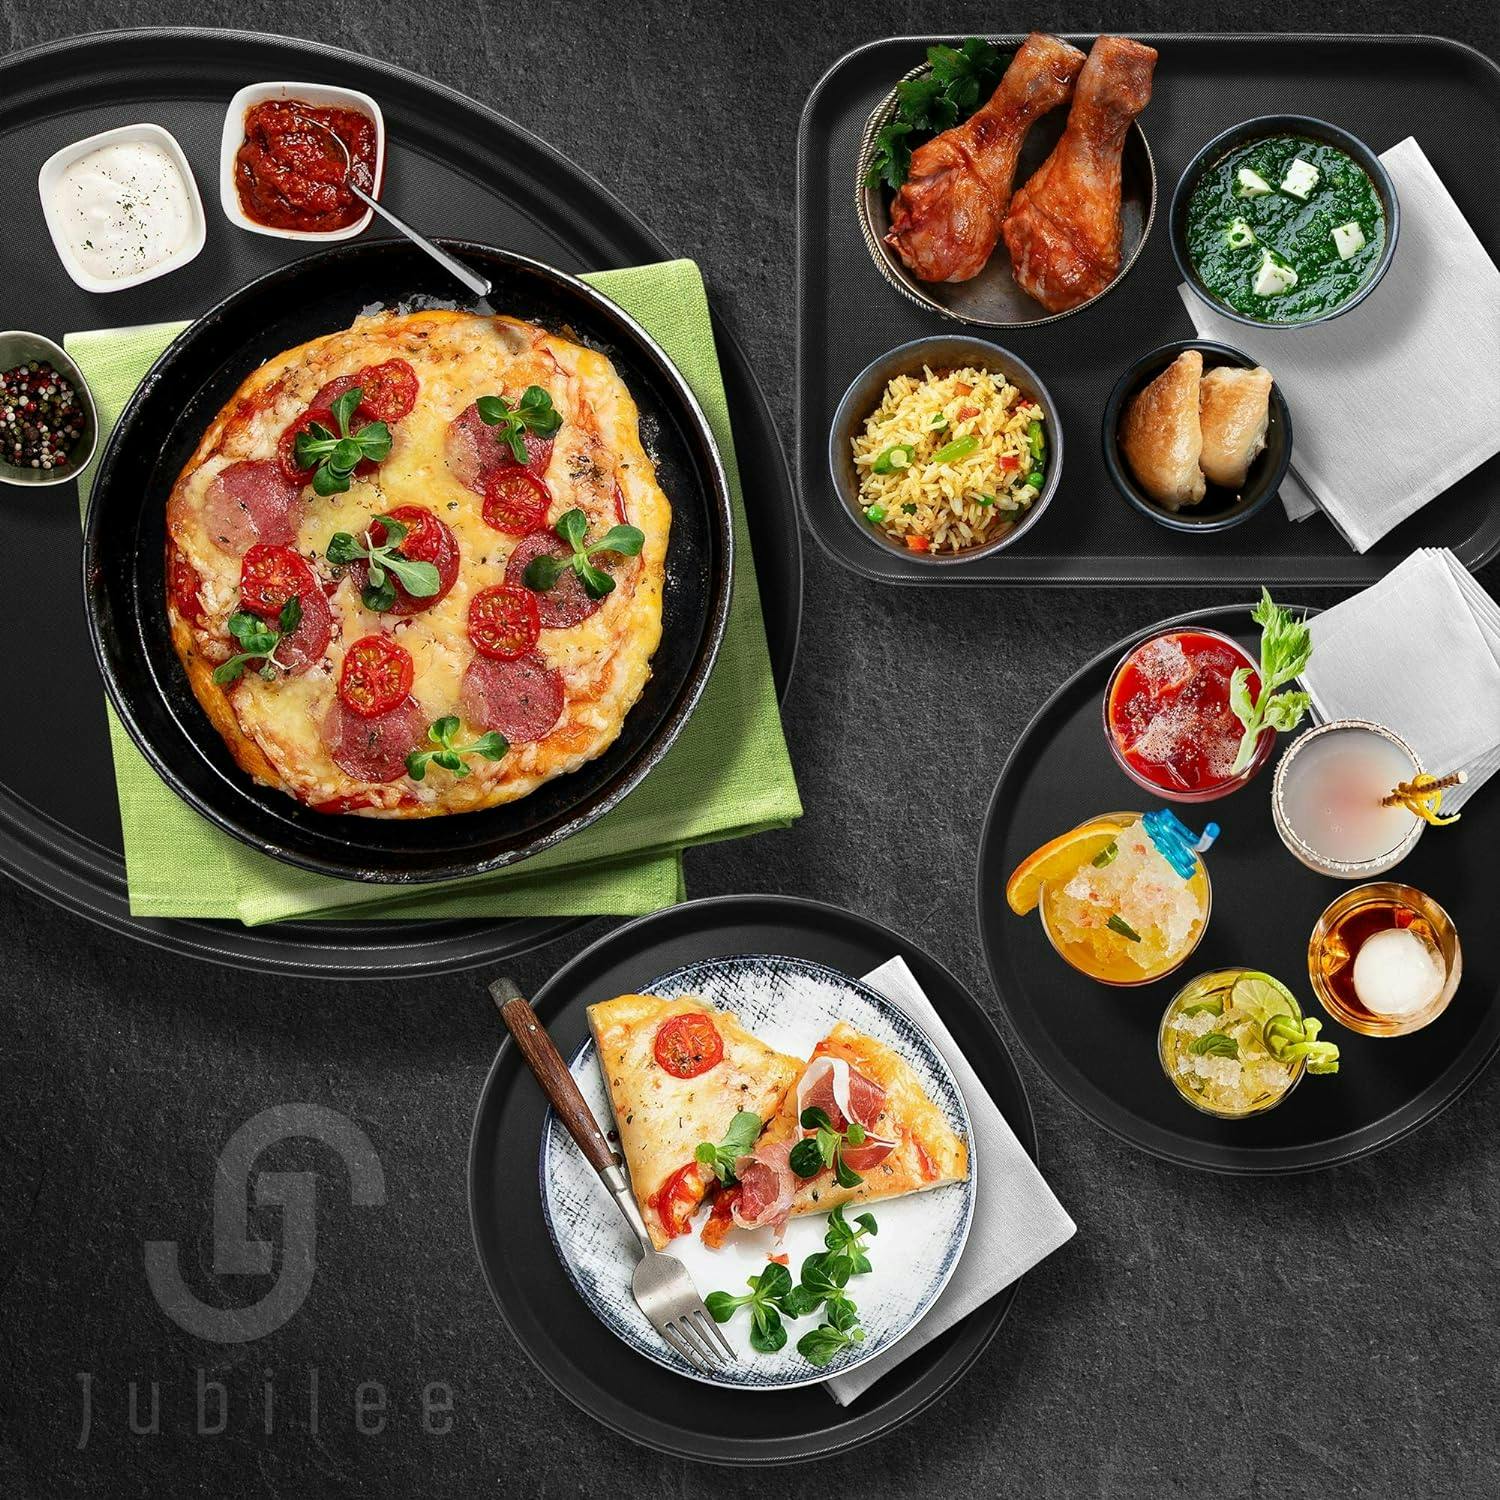 Set of 4 Jubilee 18" Round Black Non-Skid Serving Trays